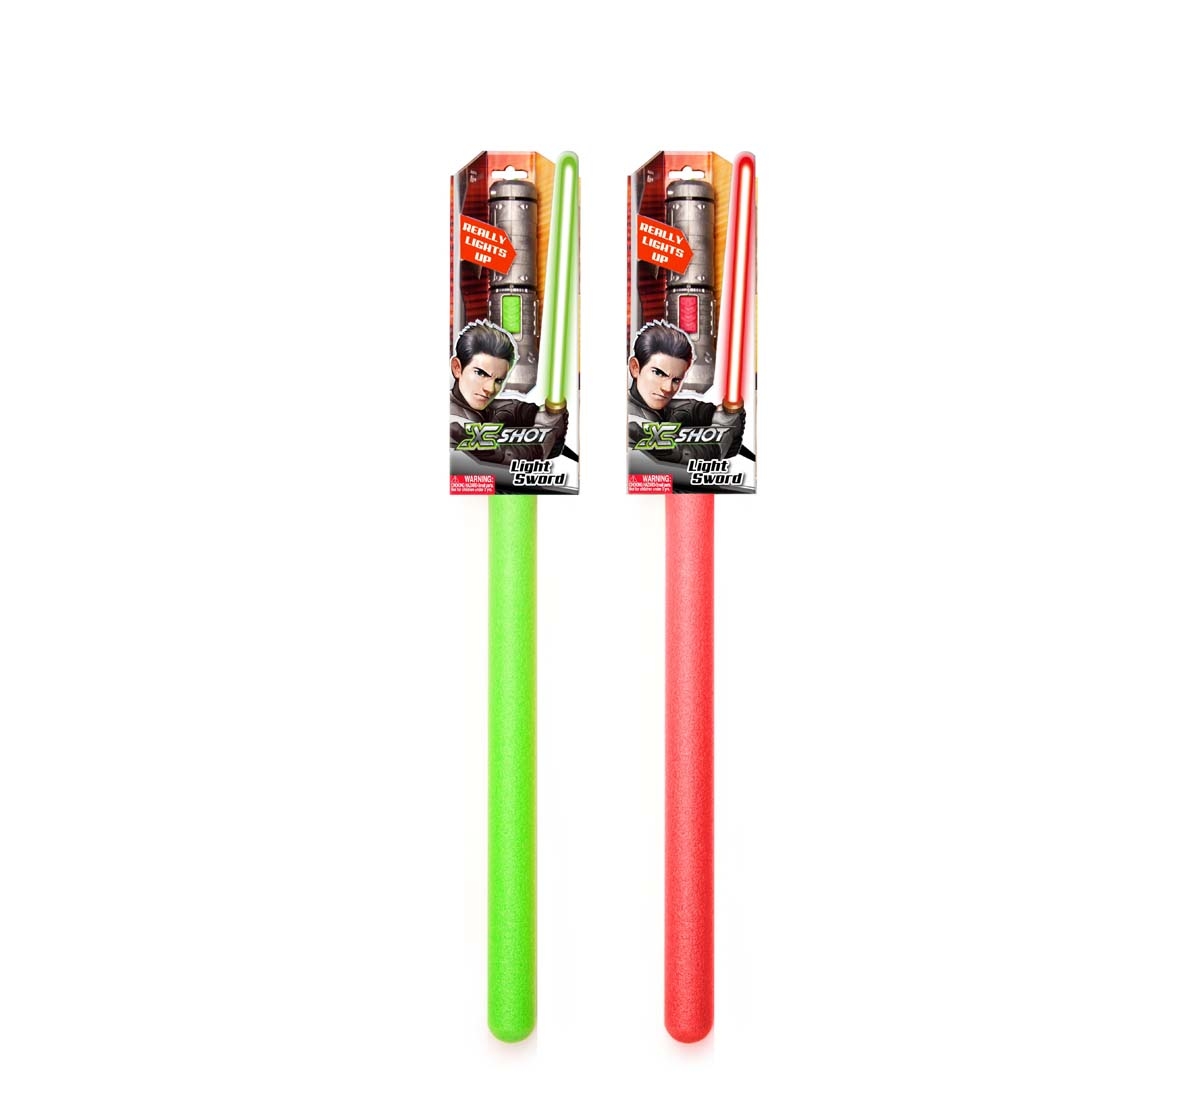 X-Shot | X-Shot Light Swords With Led Action Figure Play Sets for Kids age 8Y+ 3